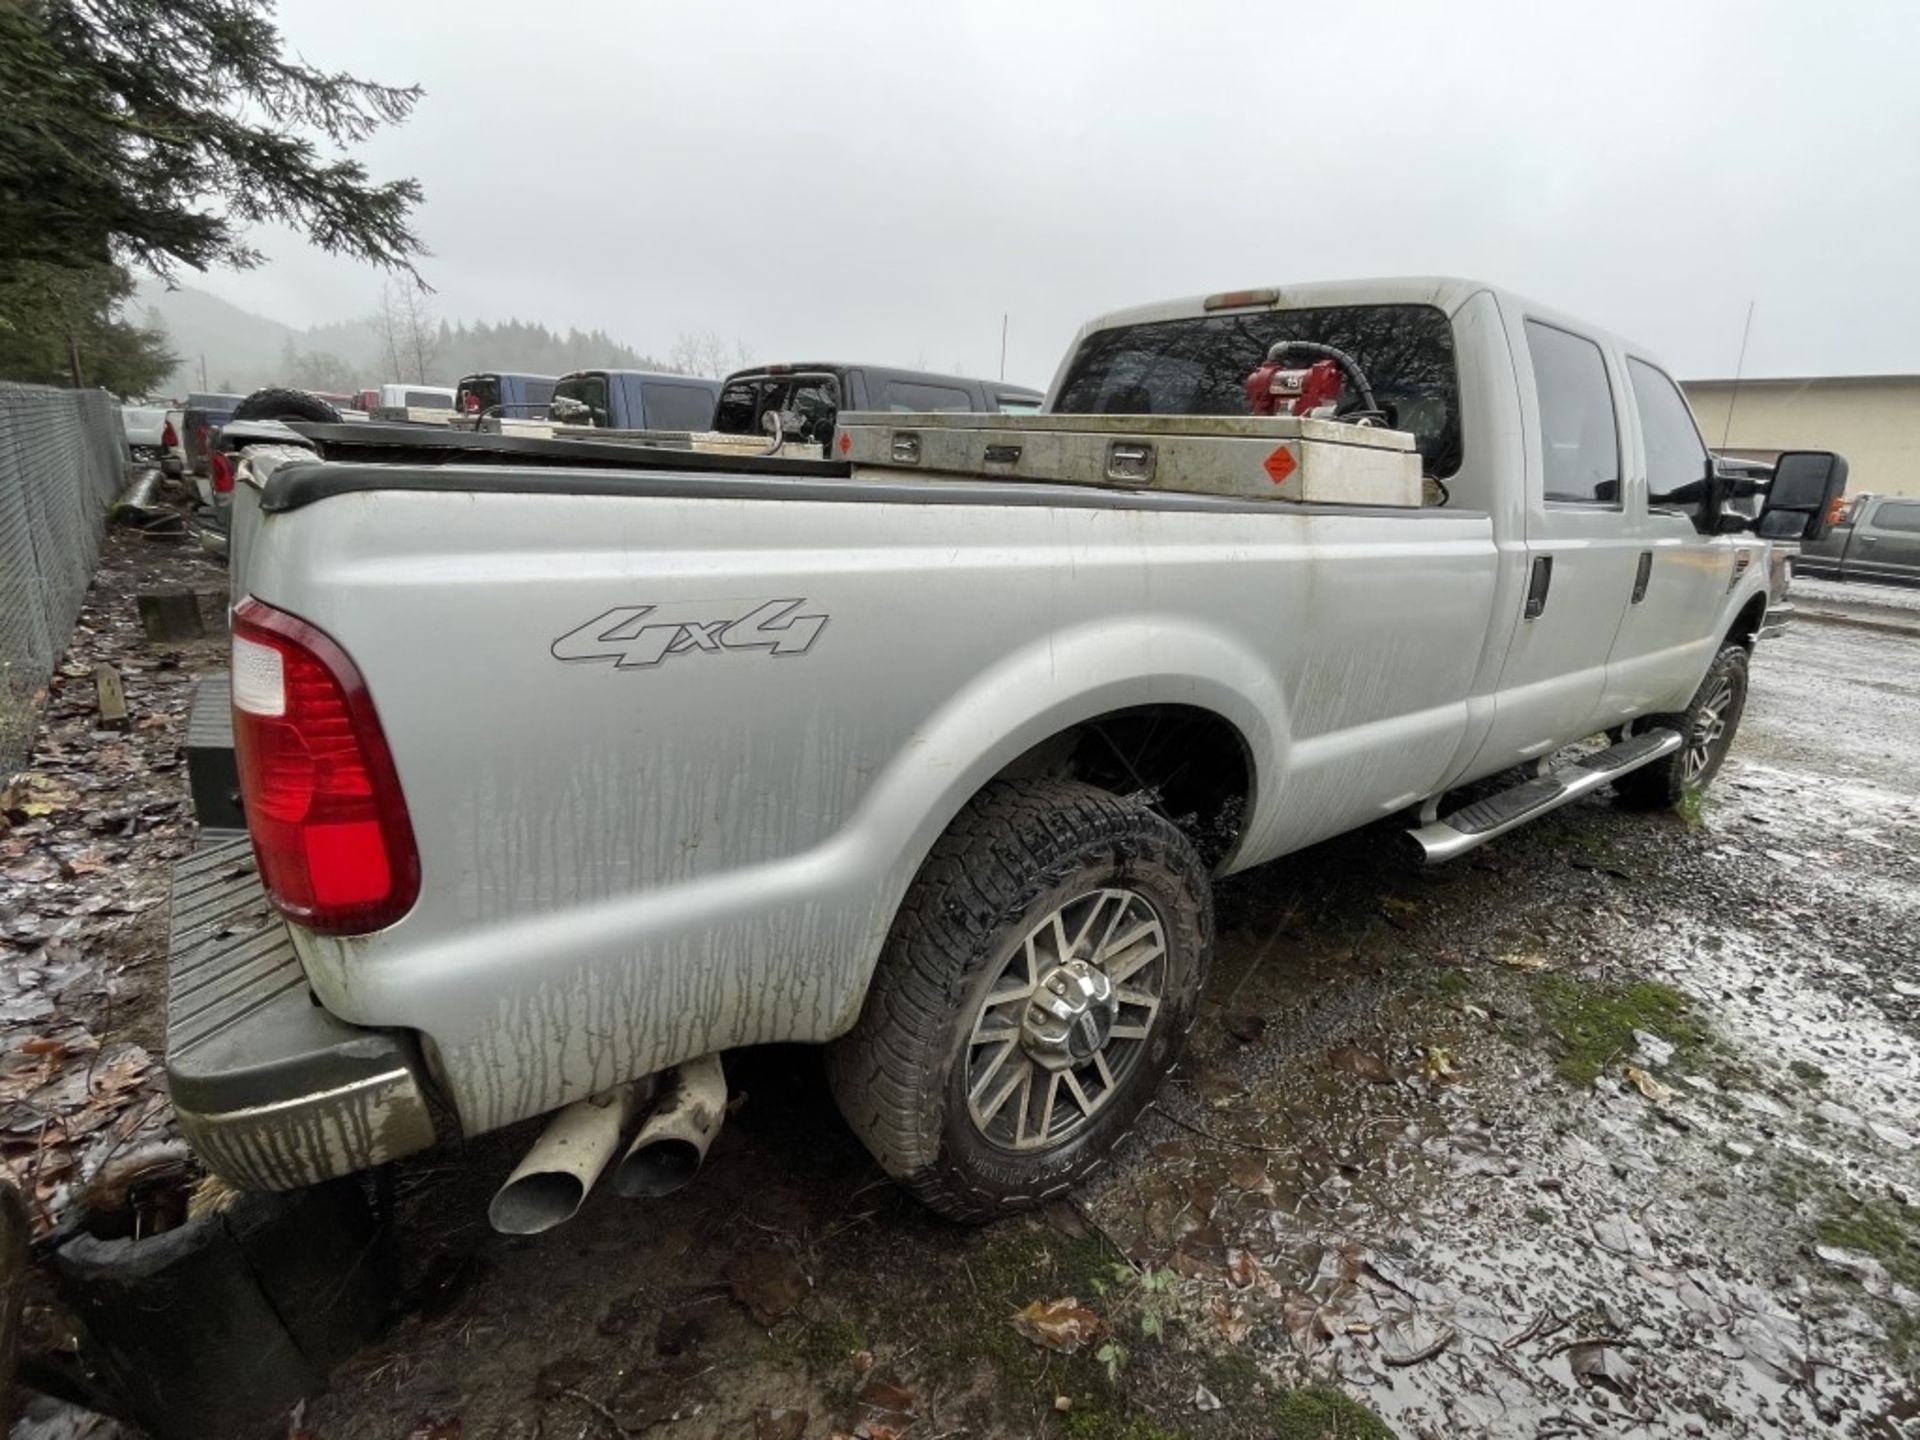 2008 Ford F350 XLT SD 4x4 Crew Cab Pickup - Image 3 of 16